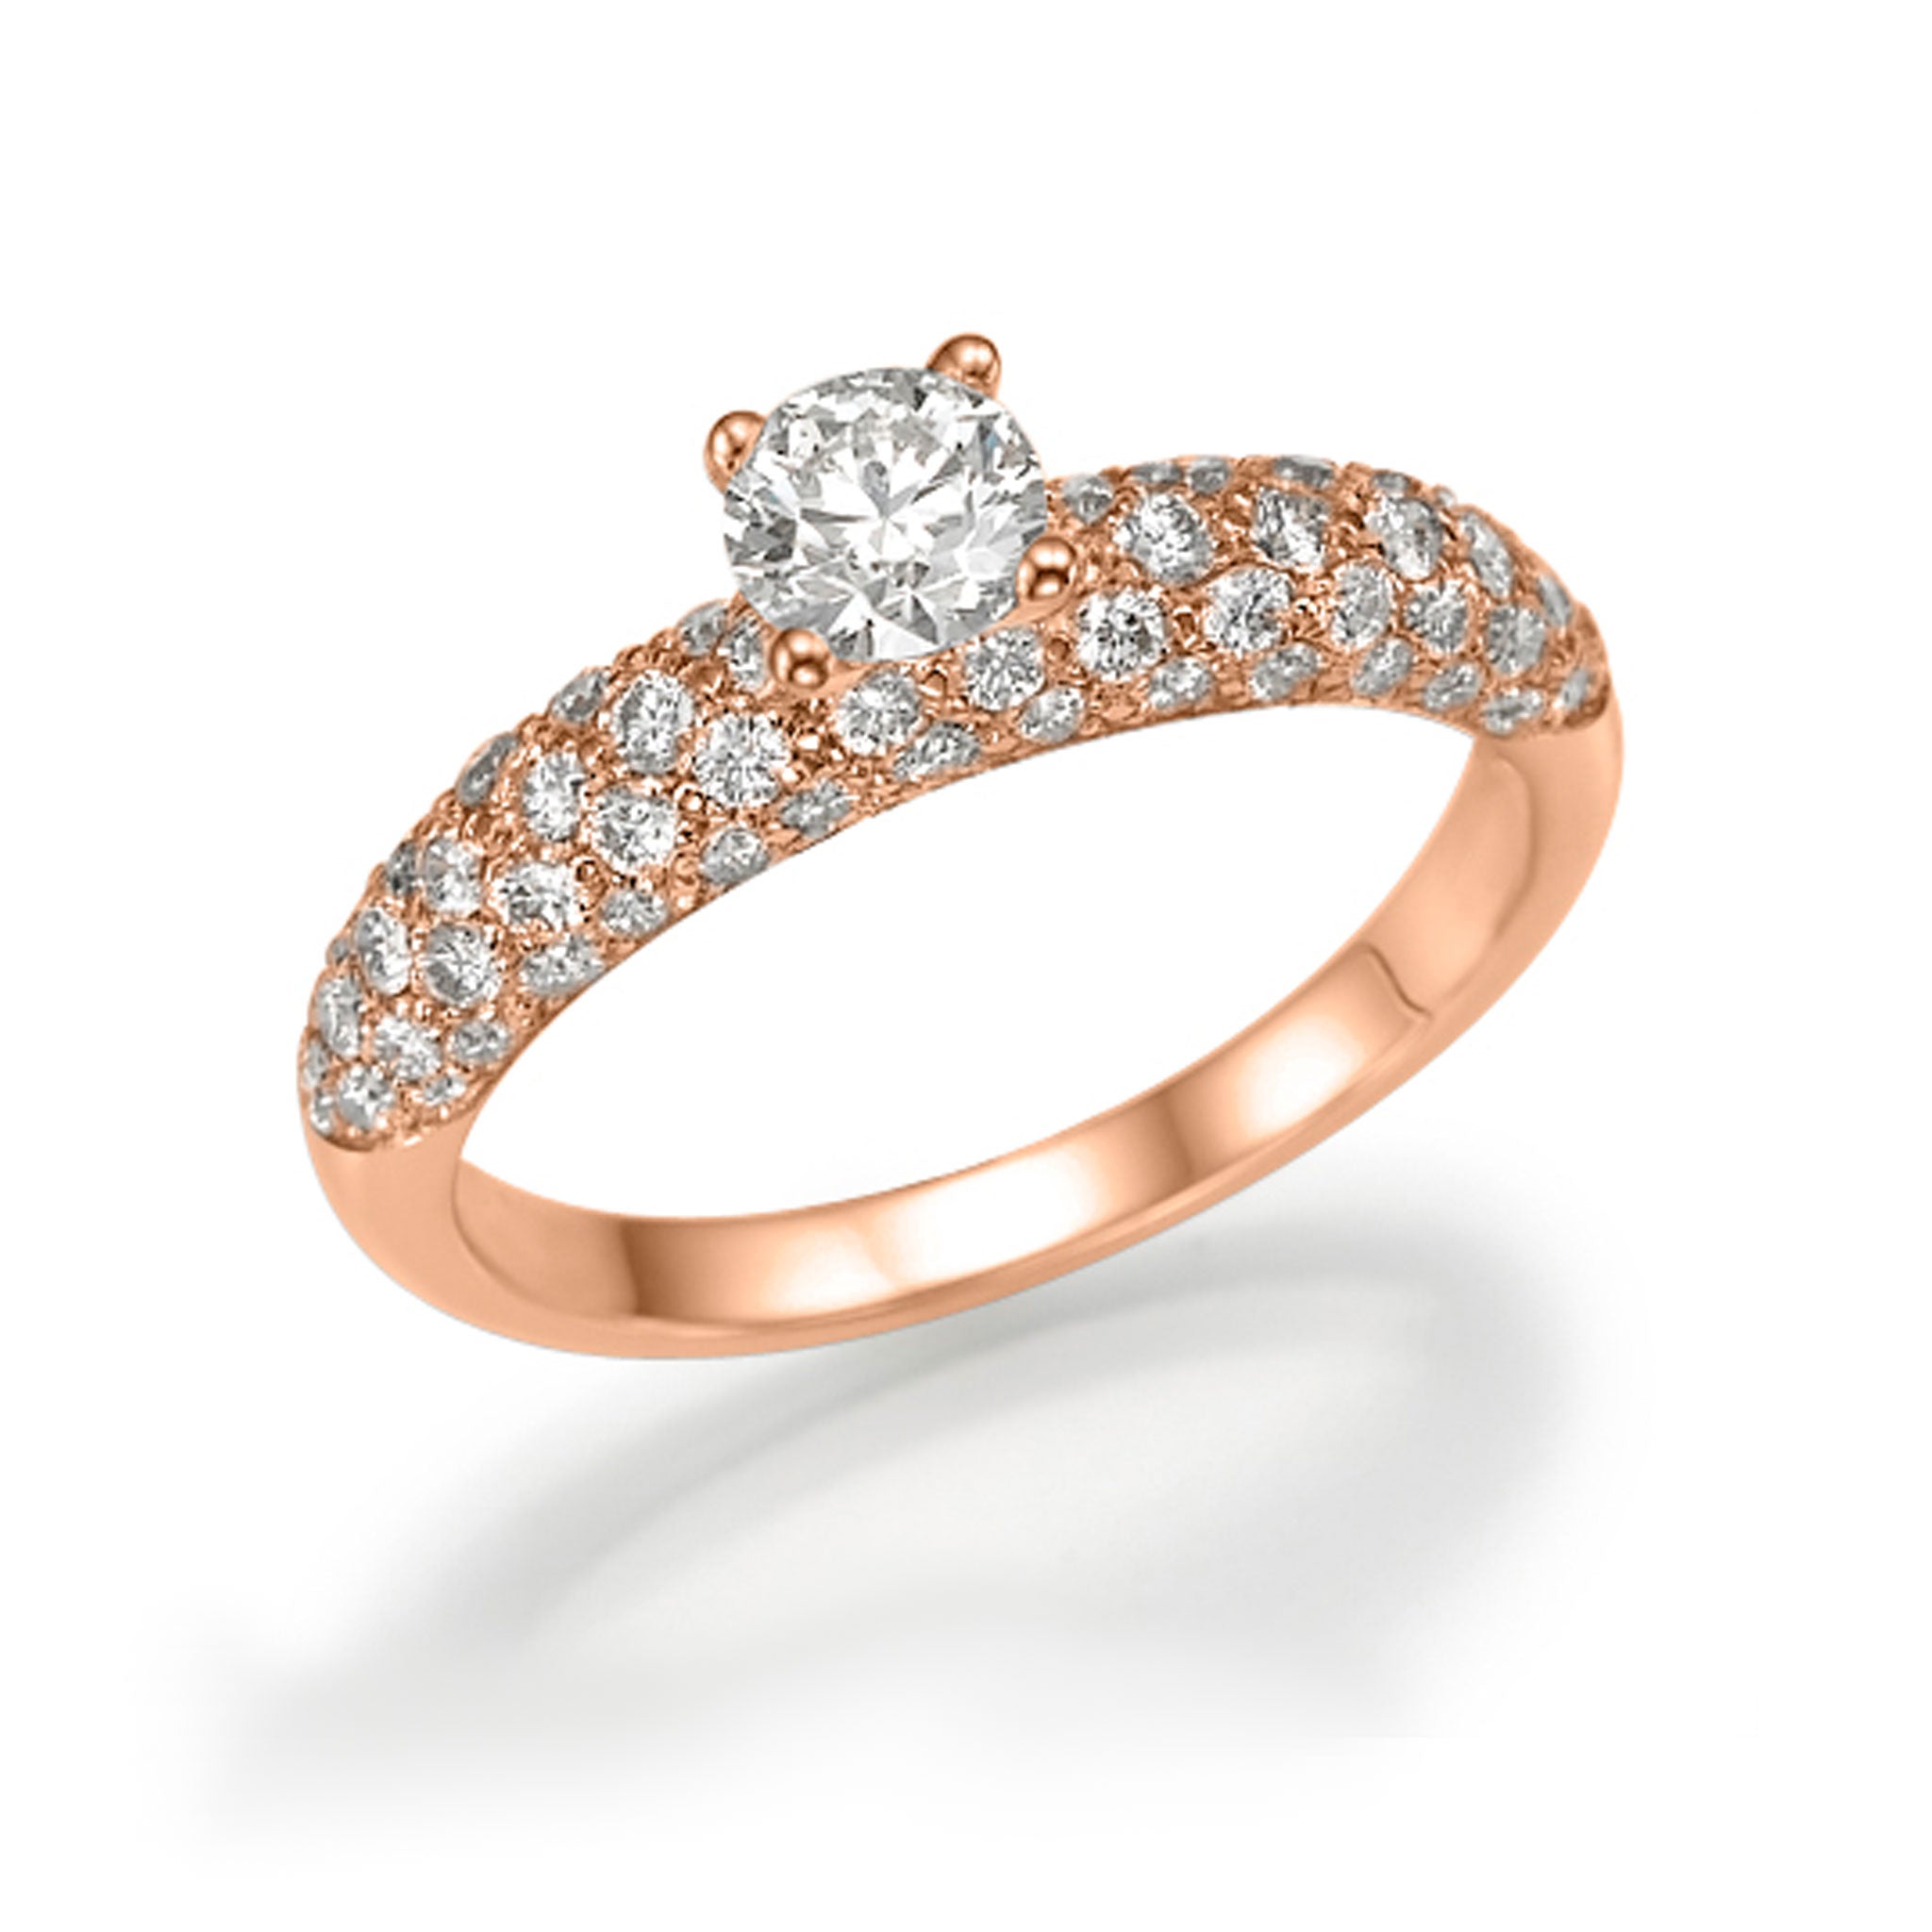 Micro Pave Of Noa - Solitaire Ring - Lab Created Diamonds